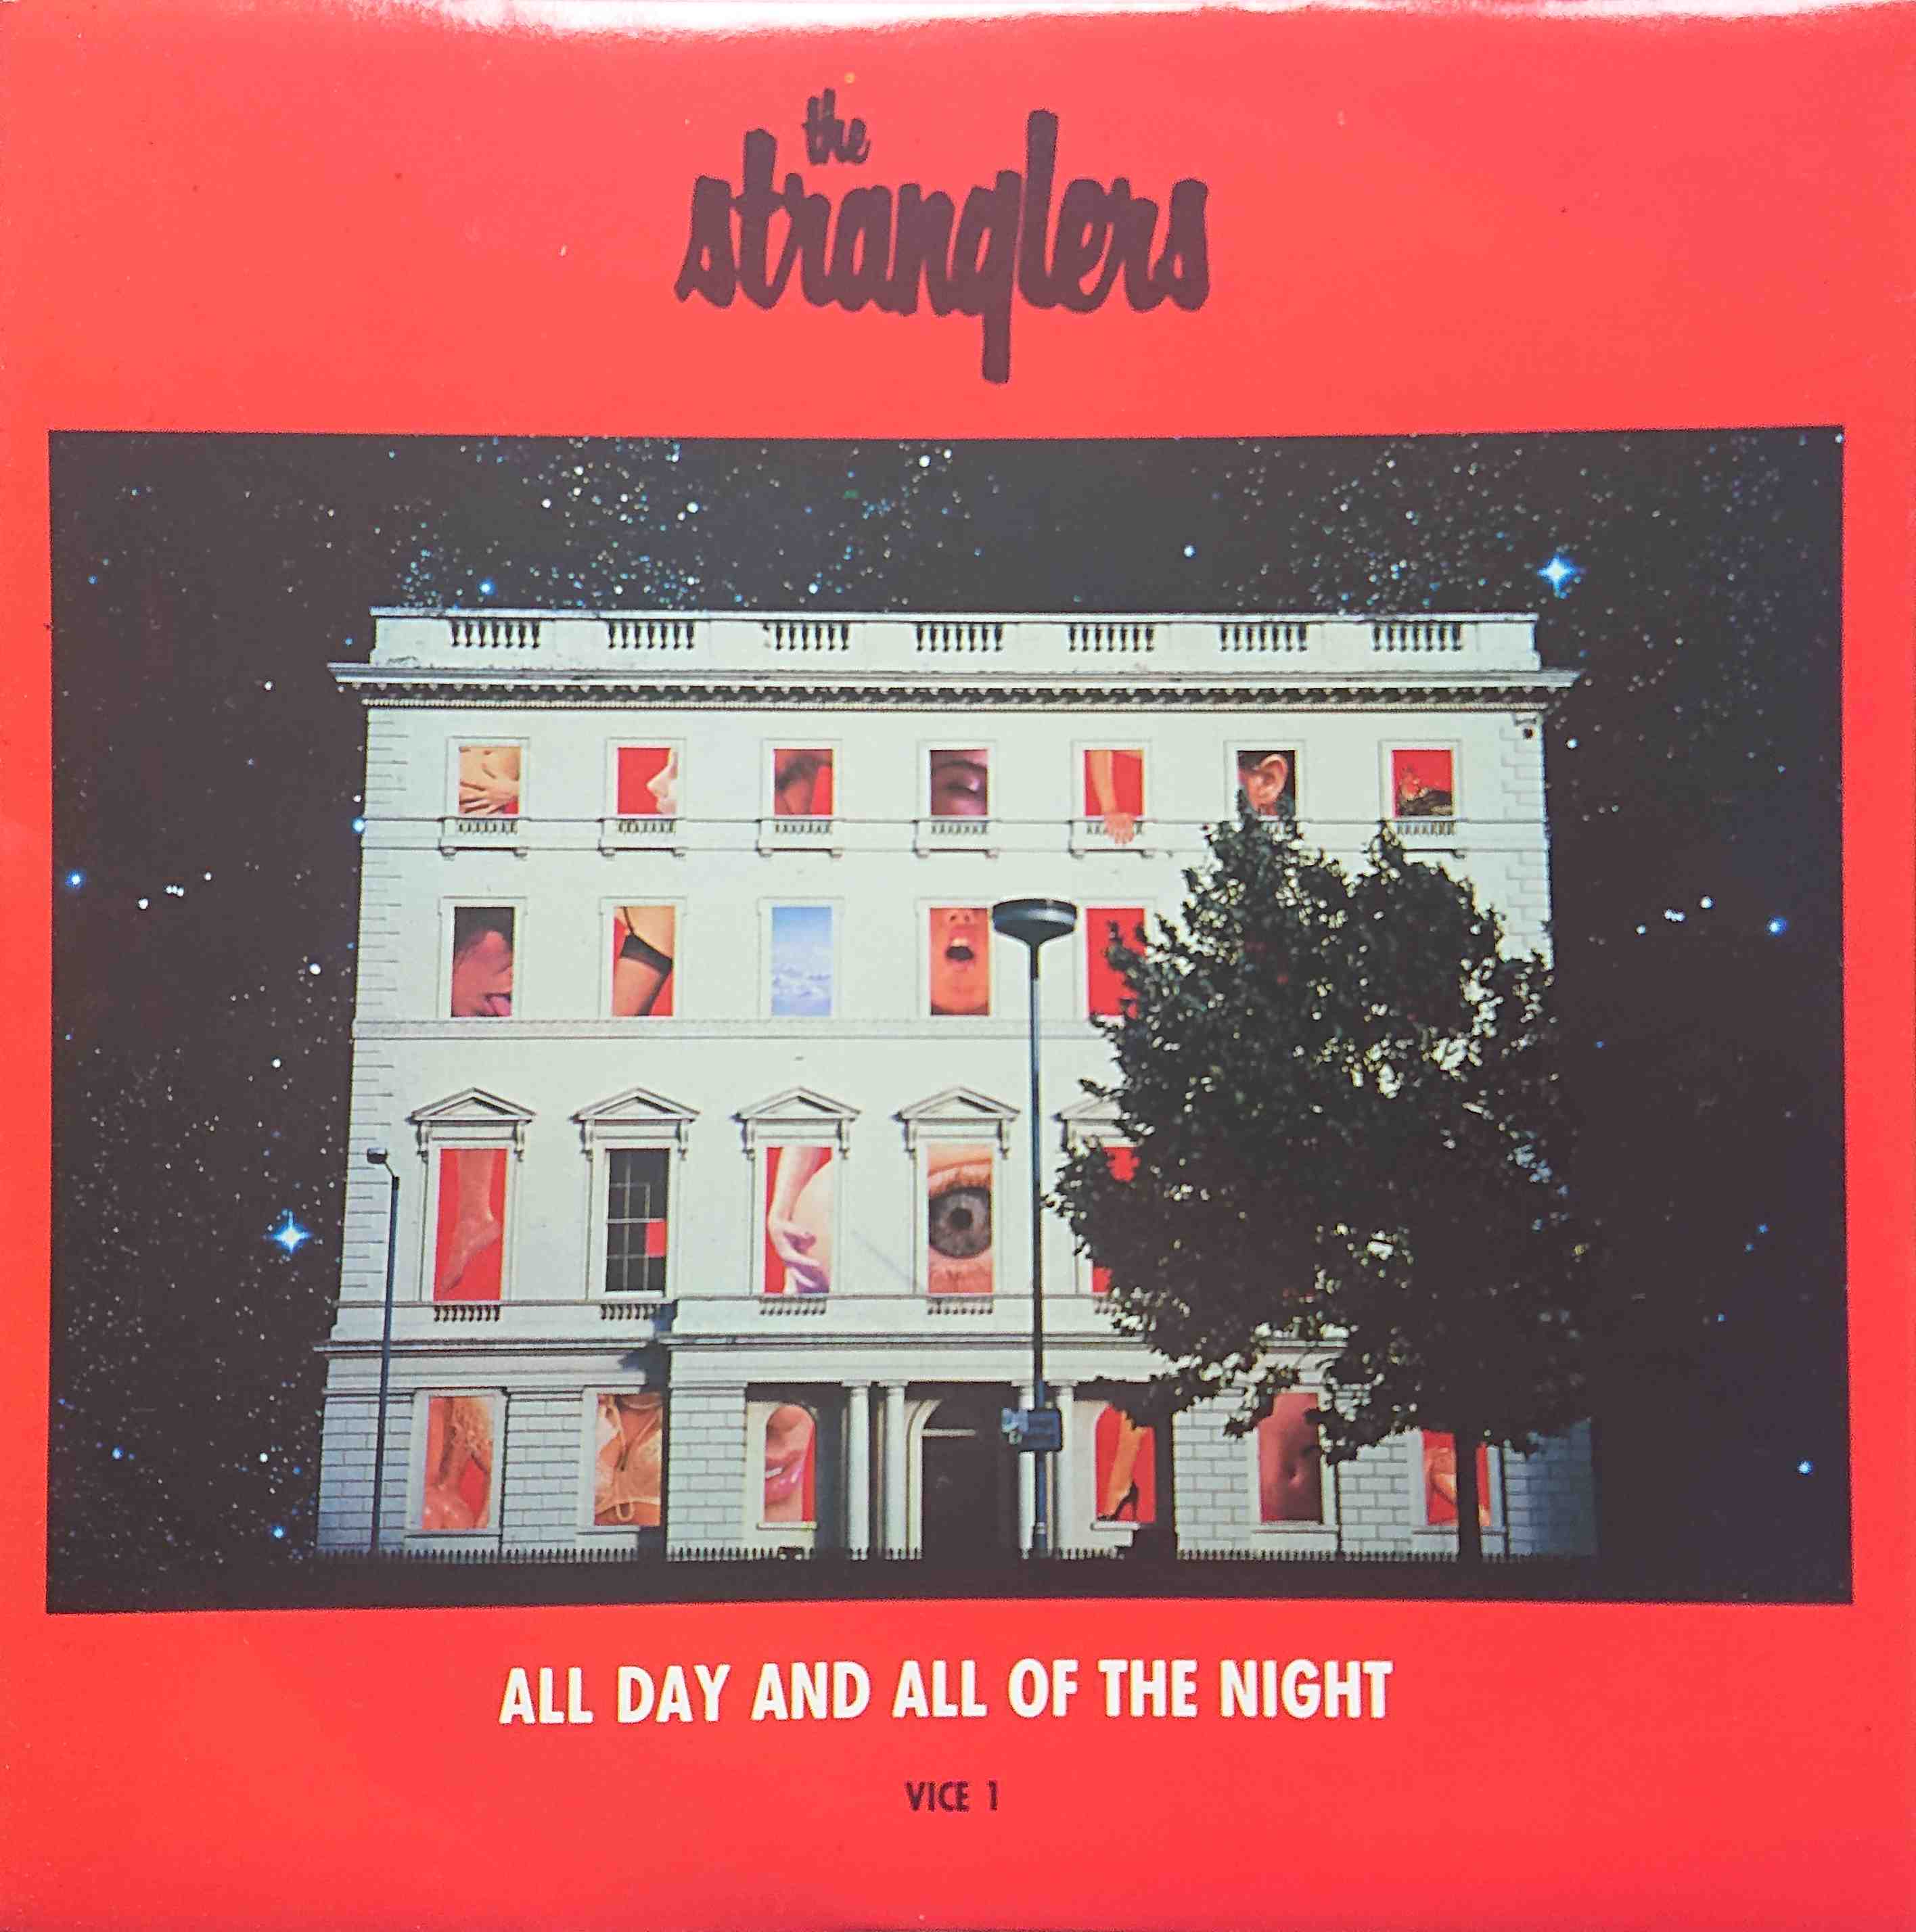 Picture of All day and all of the night by artist The Stranglers  from The Stranglers singles